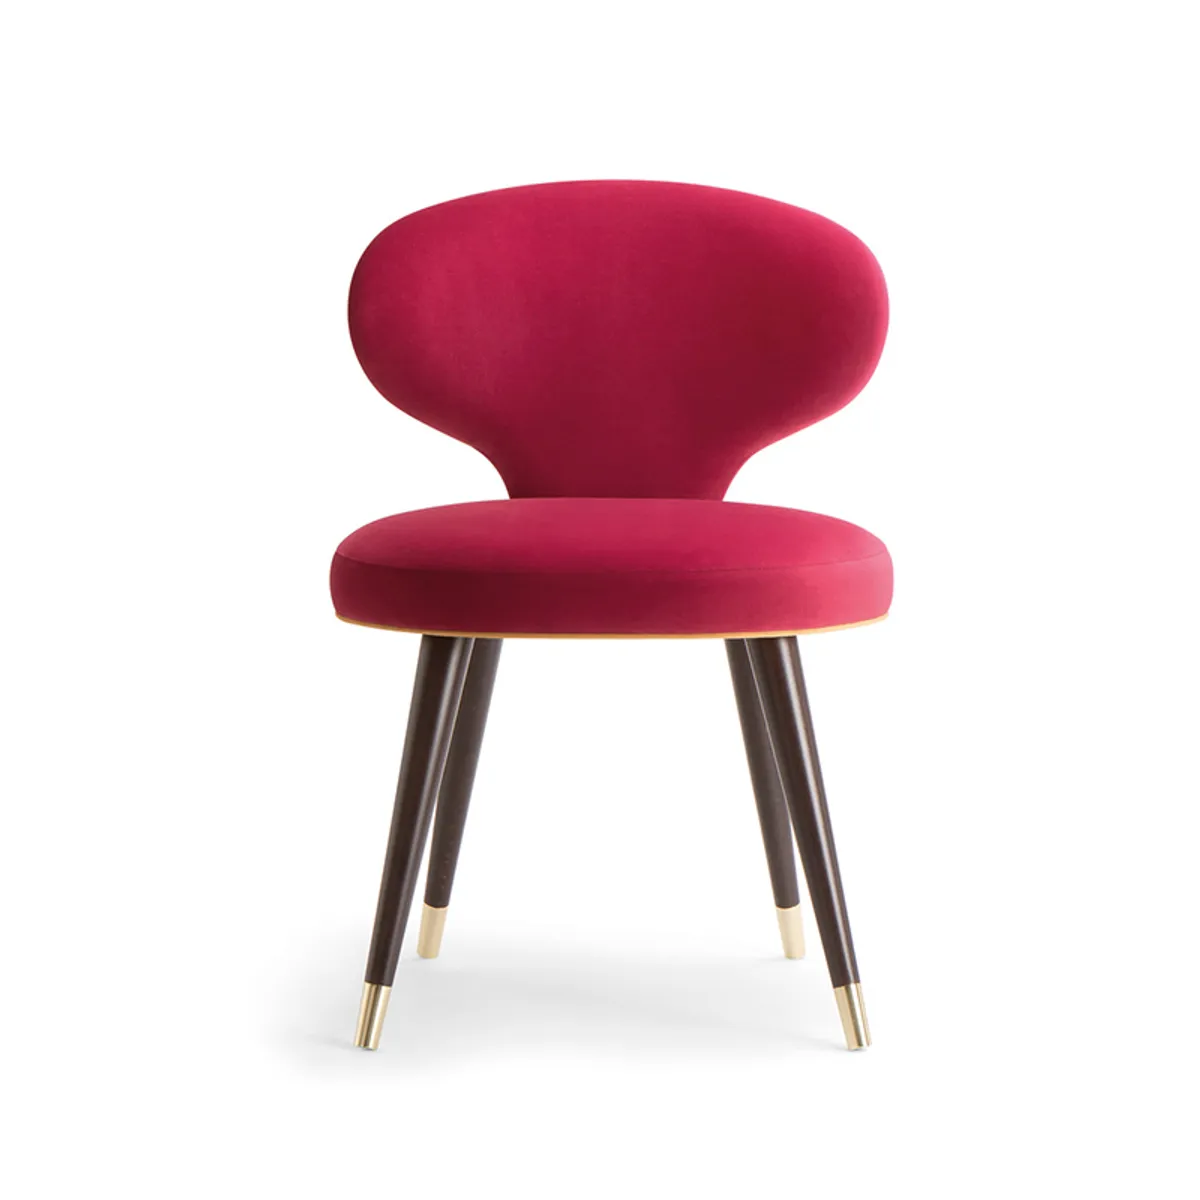 Sylvia Side Chair Pink Studded Upholstery And Wooden Legs Hotel Furniture By Insideoutcontracts78